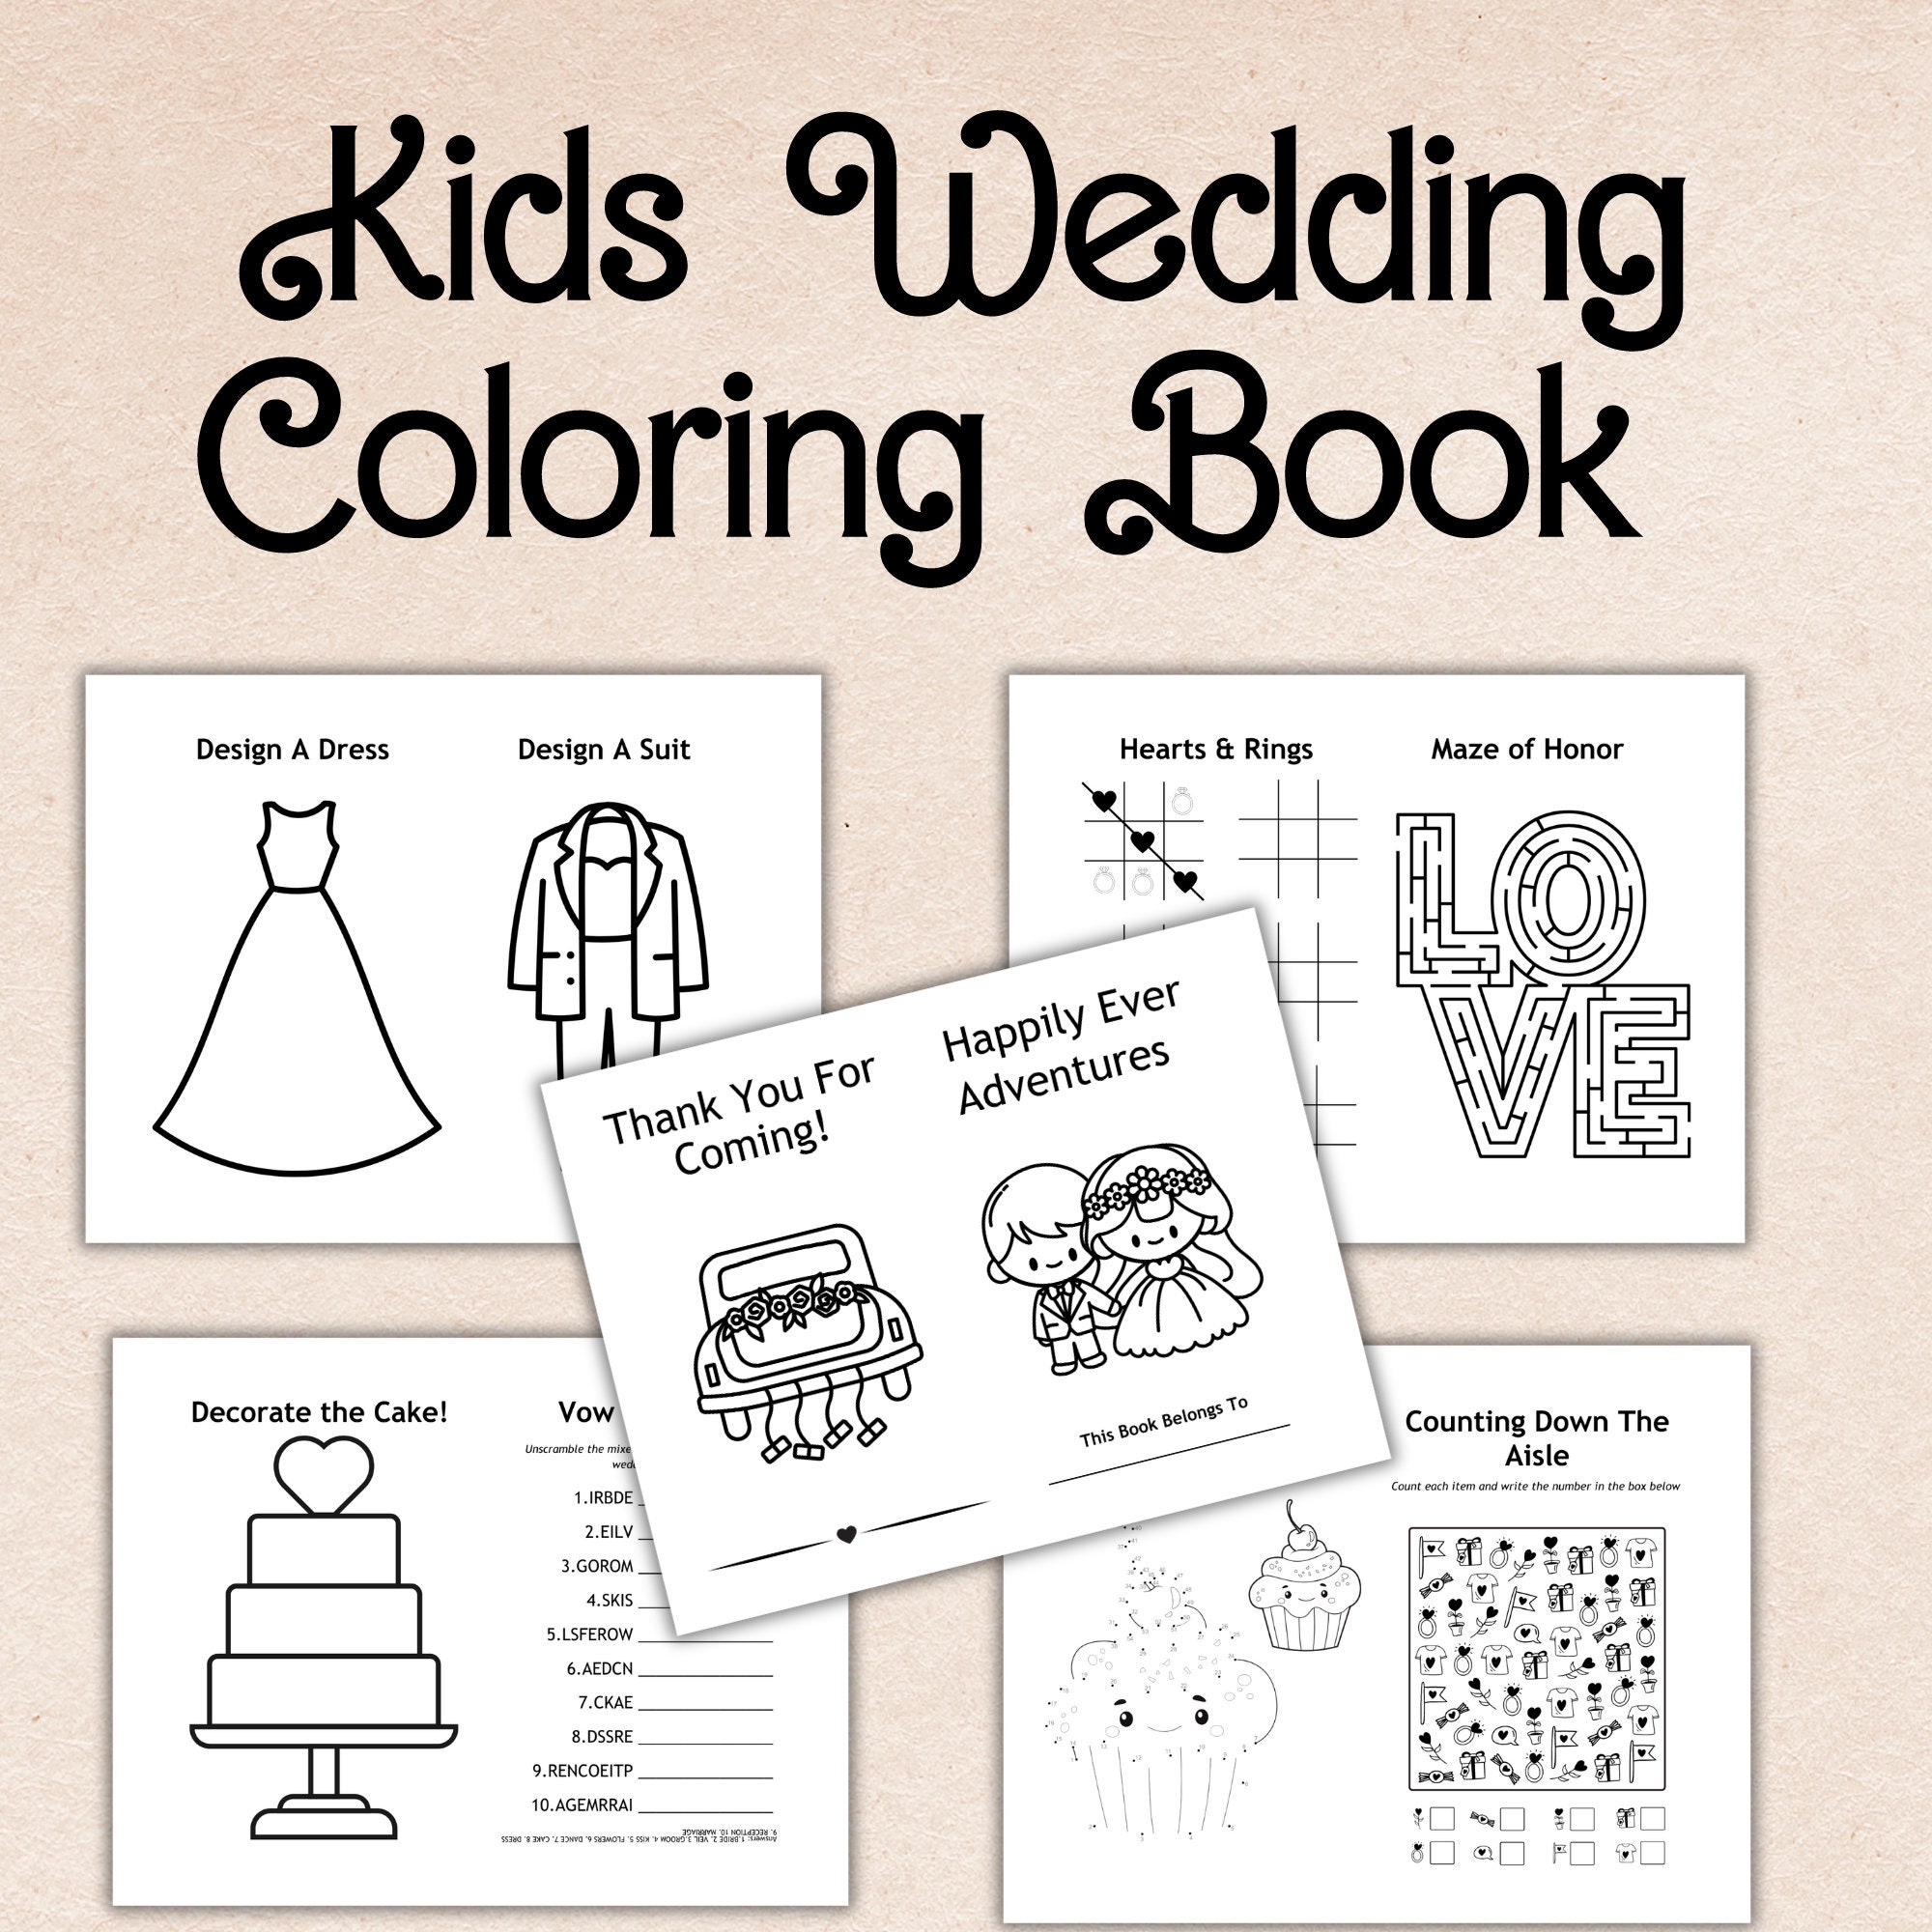 Buy Wedding Coloring Books Online In India -  India